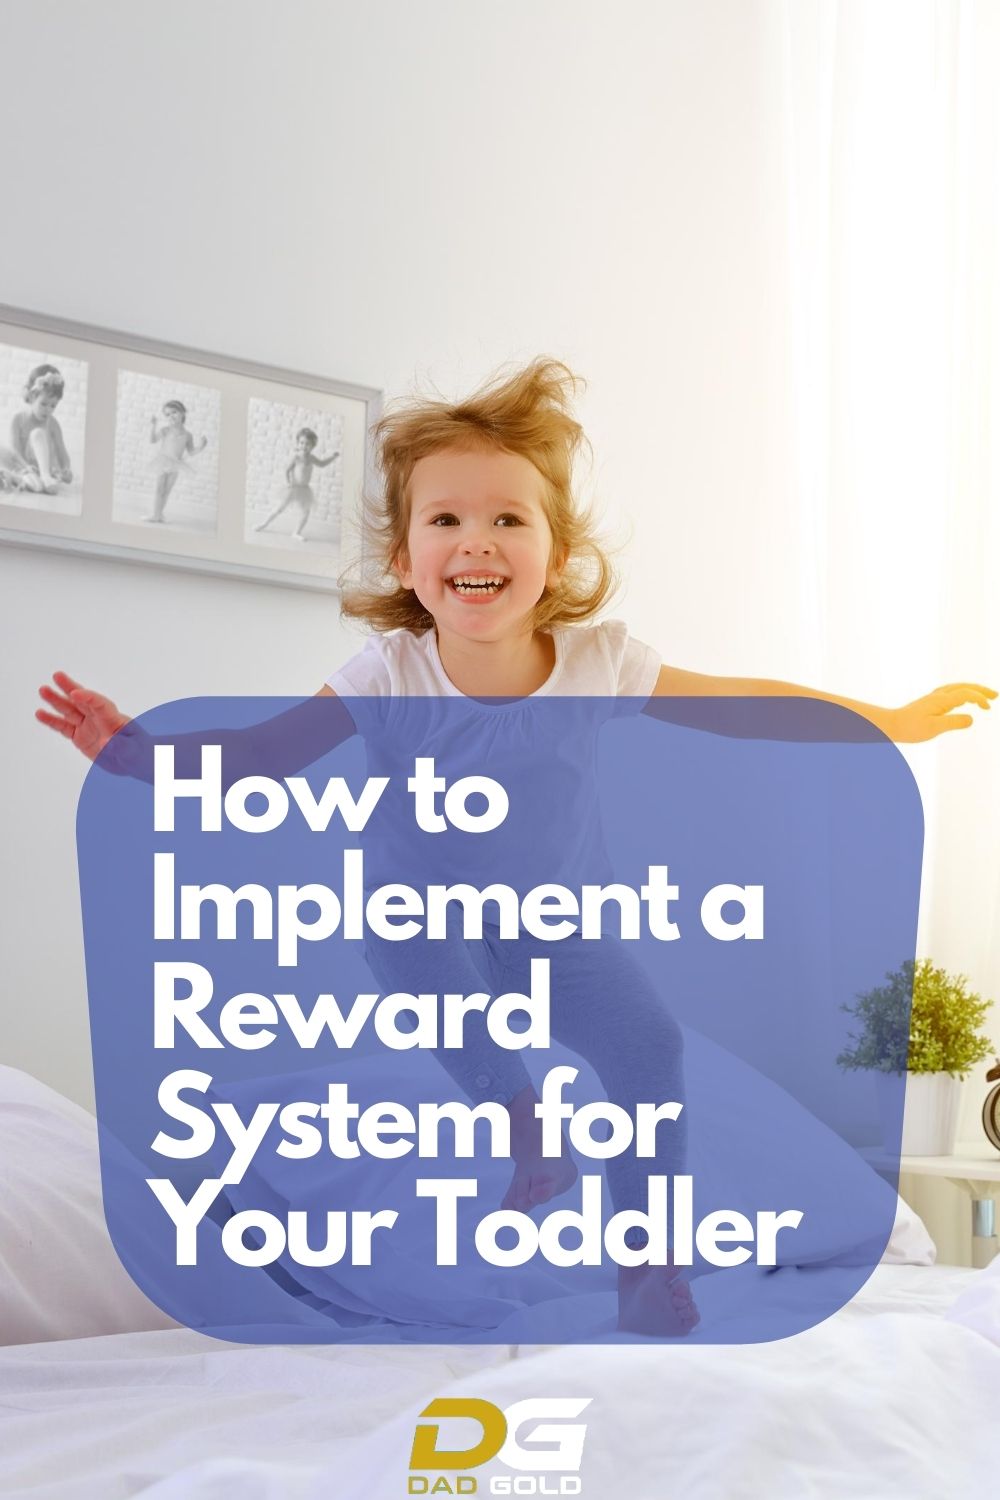 How to Implement a Reward System for Your Toddler dadgold positive parenting tips